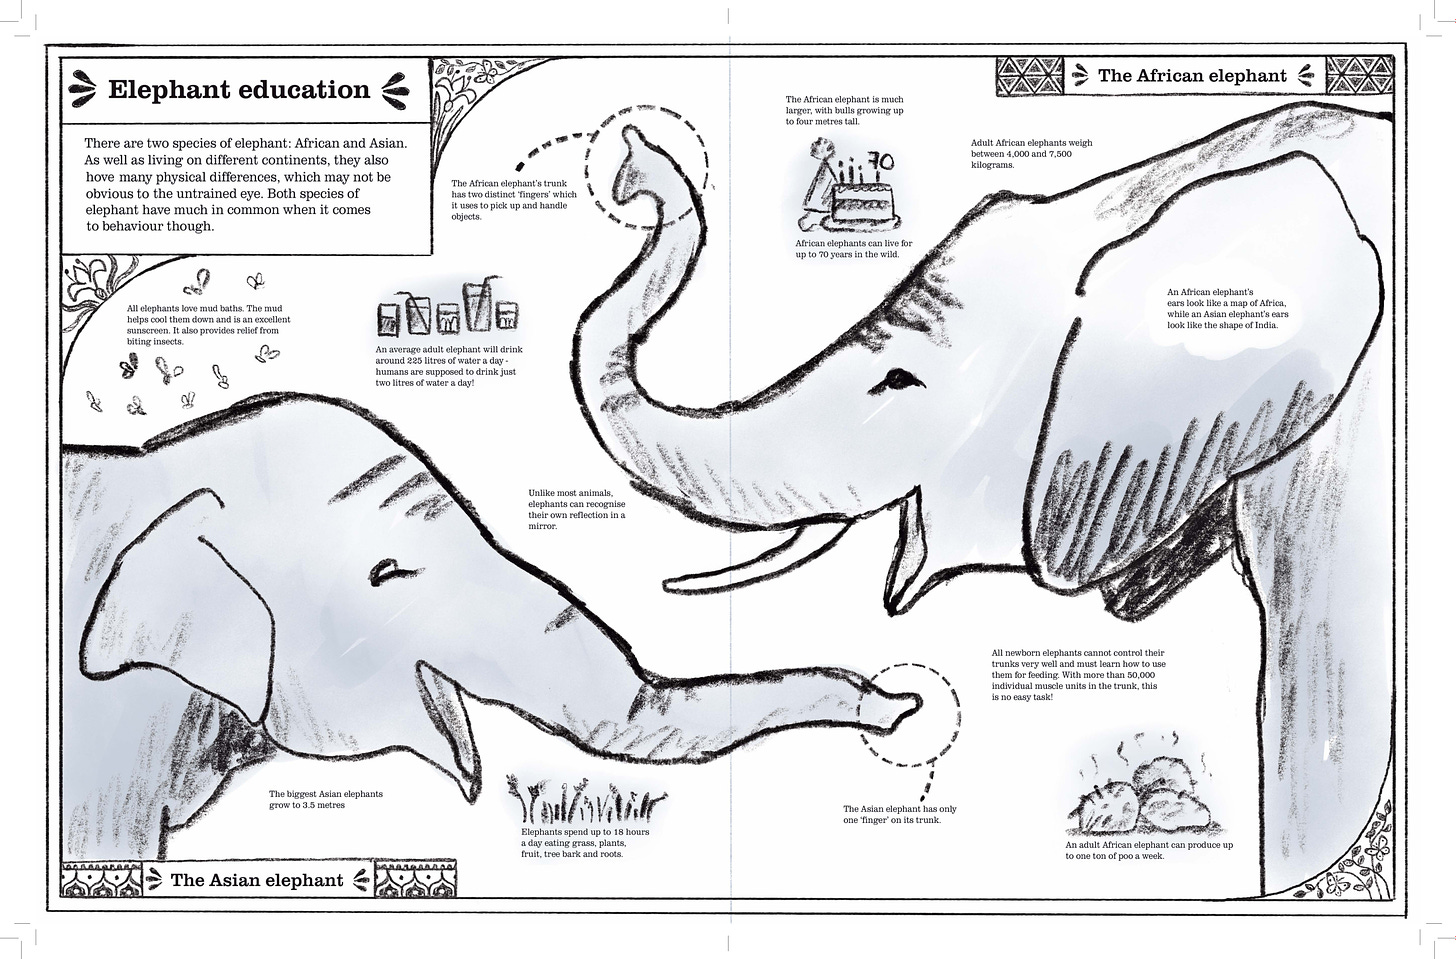 A rough illustration of two elephants facing each other surrounded by elephant facts.